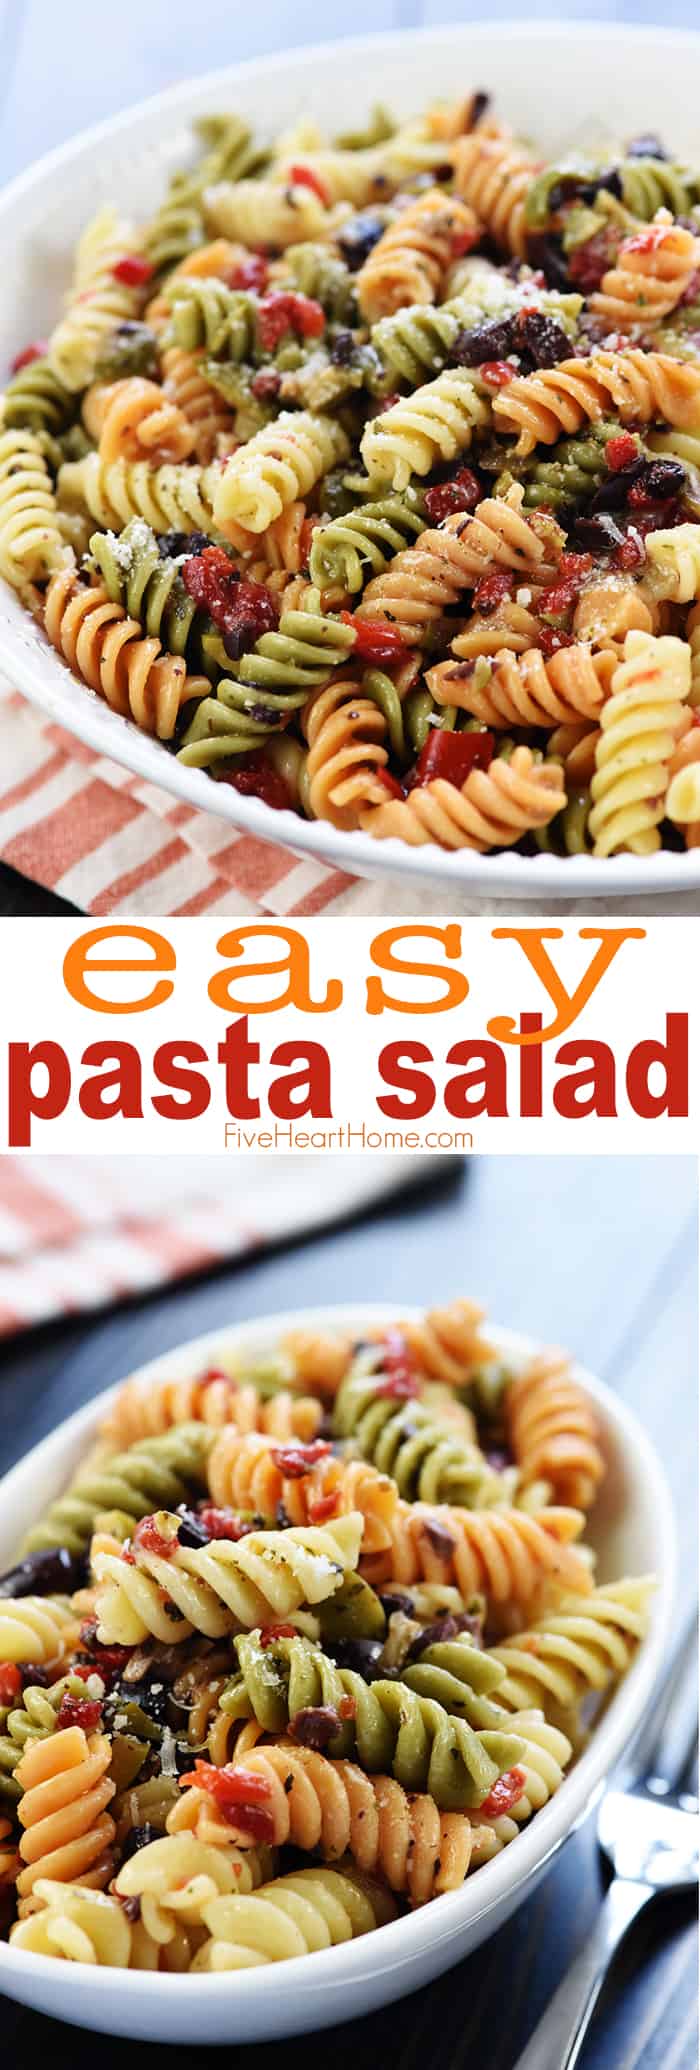 Easy Pasta Salad ~ tri-color garden rotini is studded with diced olives and pimentos, tossed with a zesty homemade Italian dressing, and showered with Parmesan for a versatile summer side dish recipe! | FiveHeartHome.com via @fivehearthome